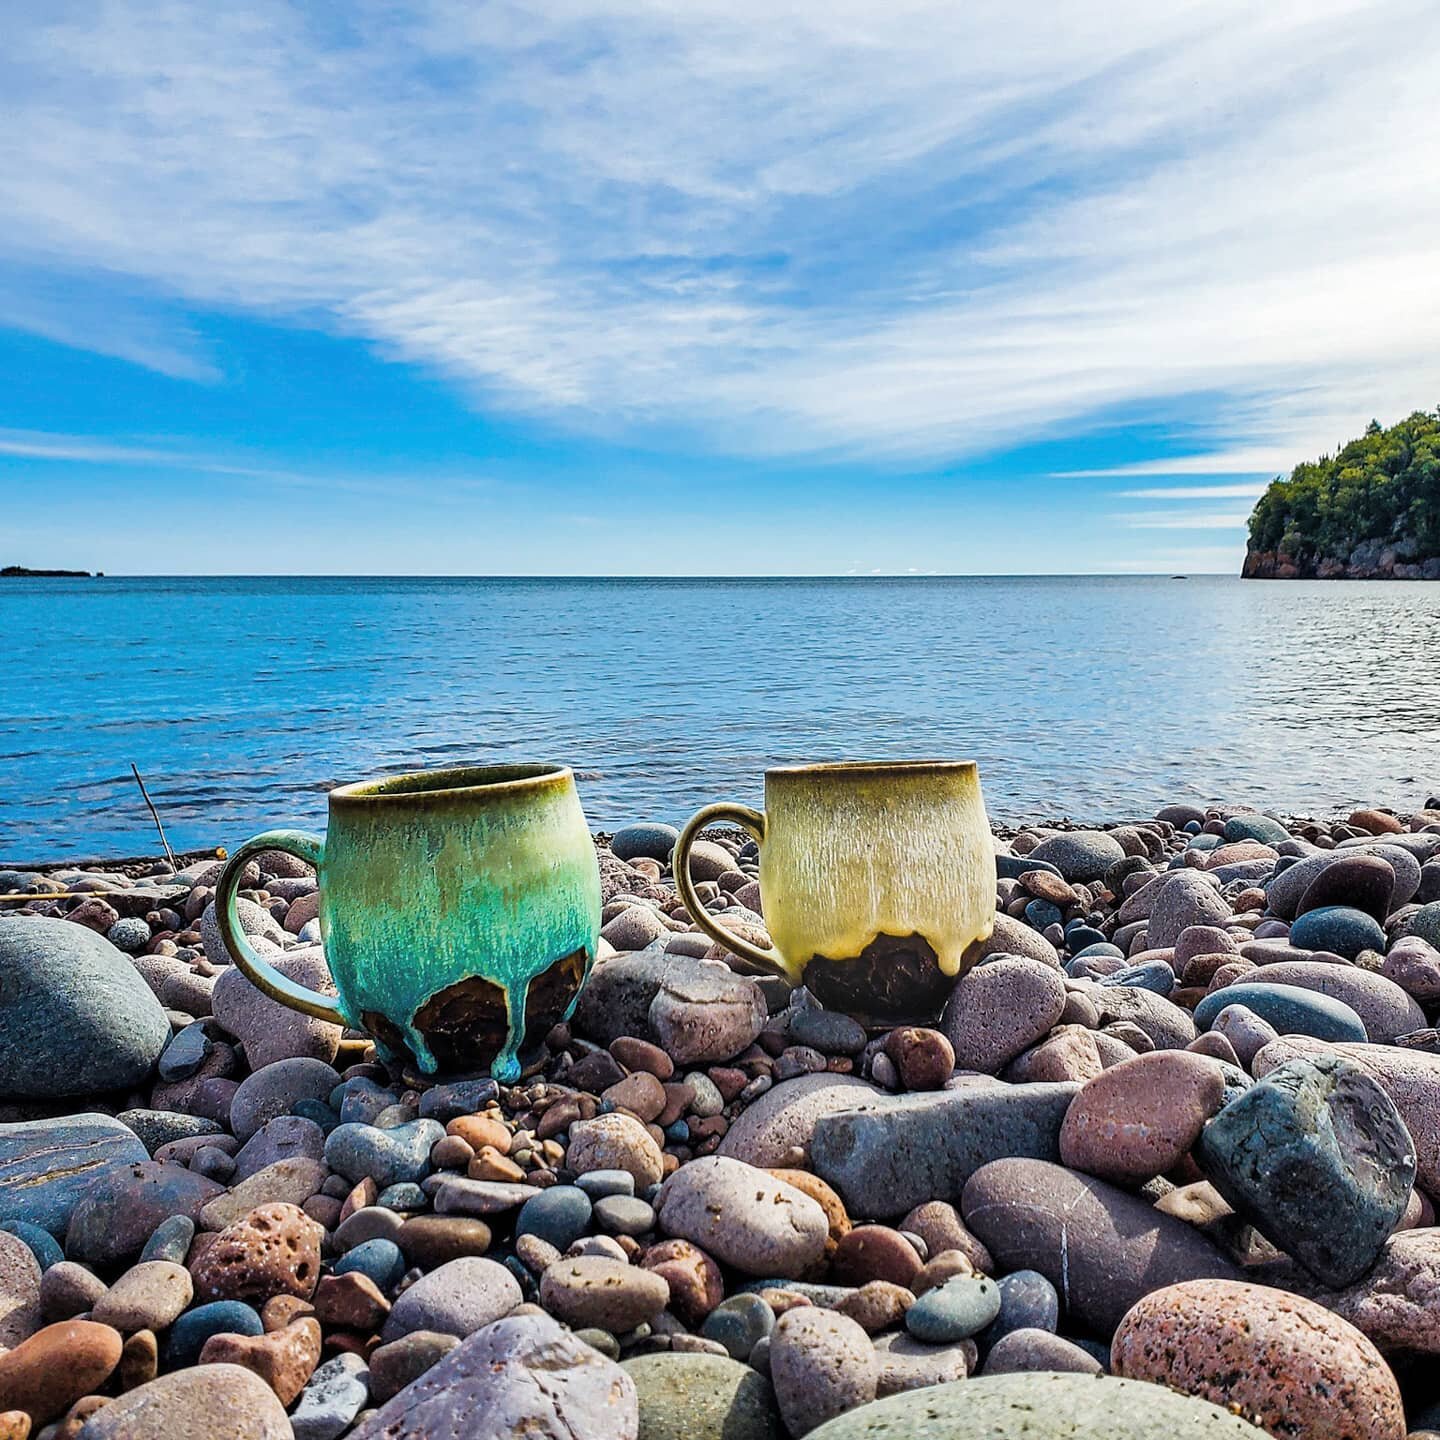 You know what is better than one mug....two mugs chilling on a beach ⛱ 
.
.
.
.
#stonewarepottery #minnesotaphotographer #landscape #potterywheel #minnesotalife #stoneware #minnesotaexposure #beach #coffeemug #coffeetime☕ #mug #water #oceanvibes #chi